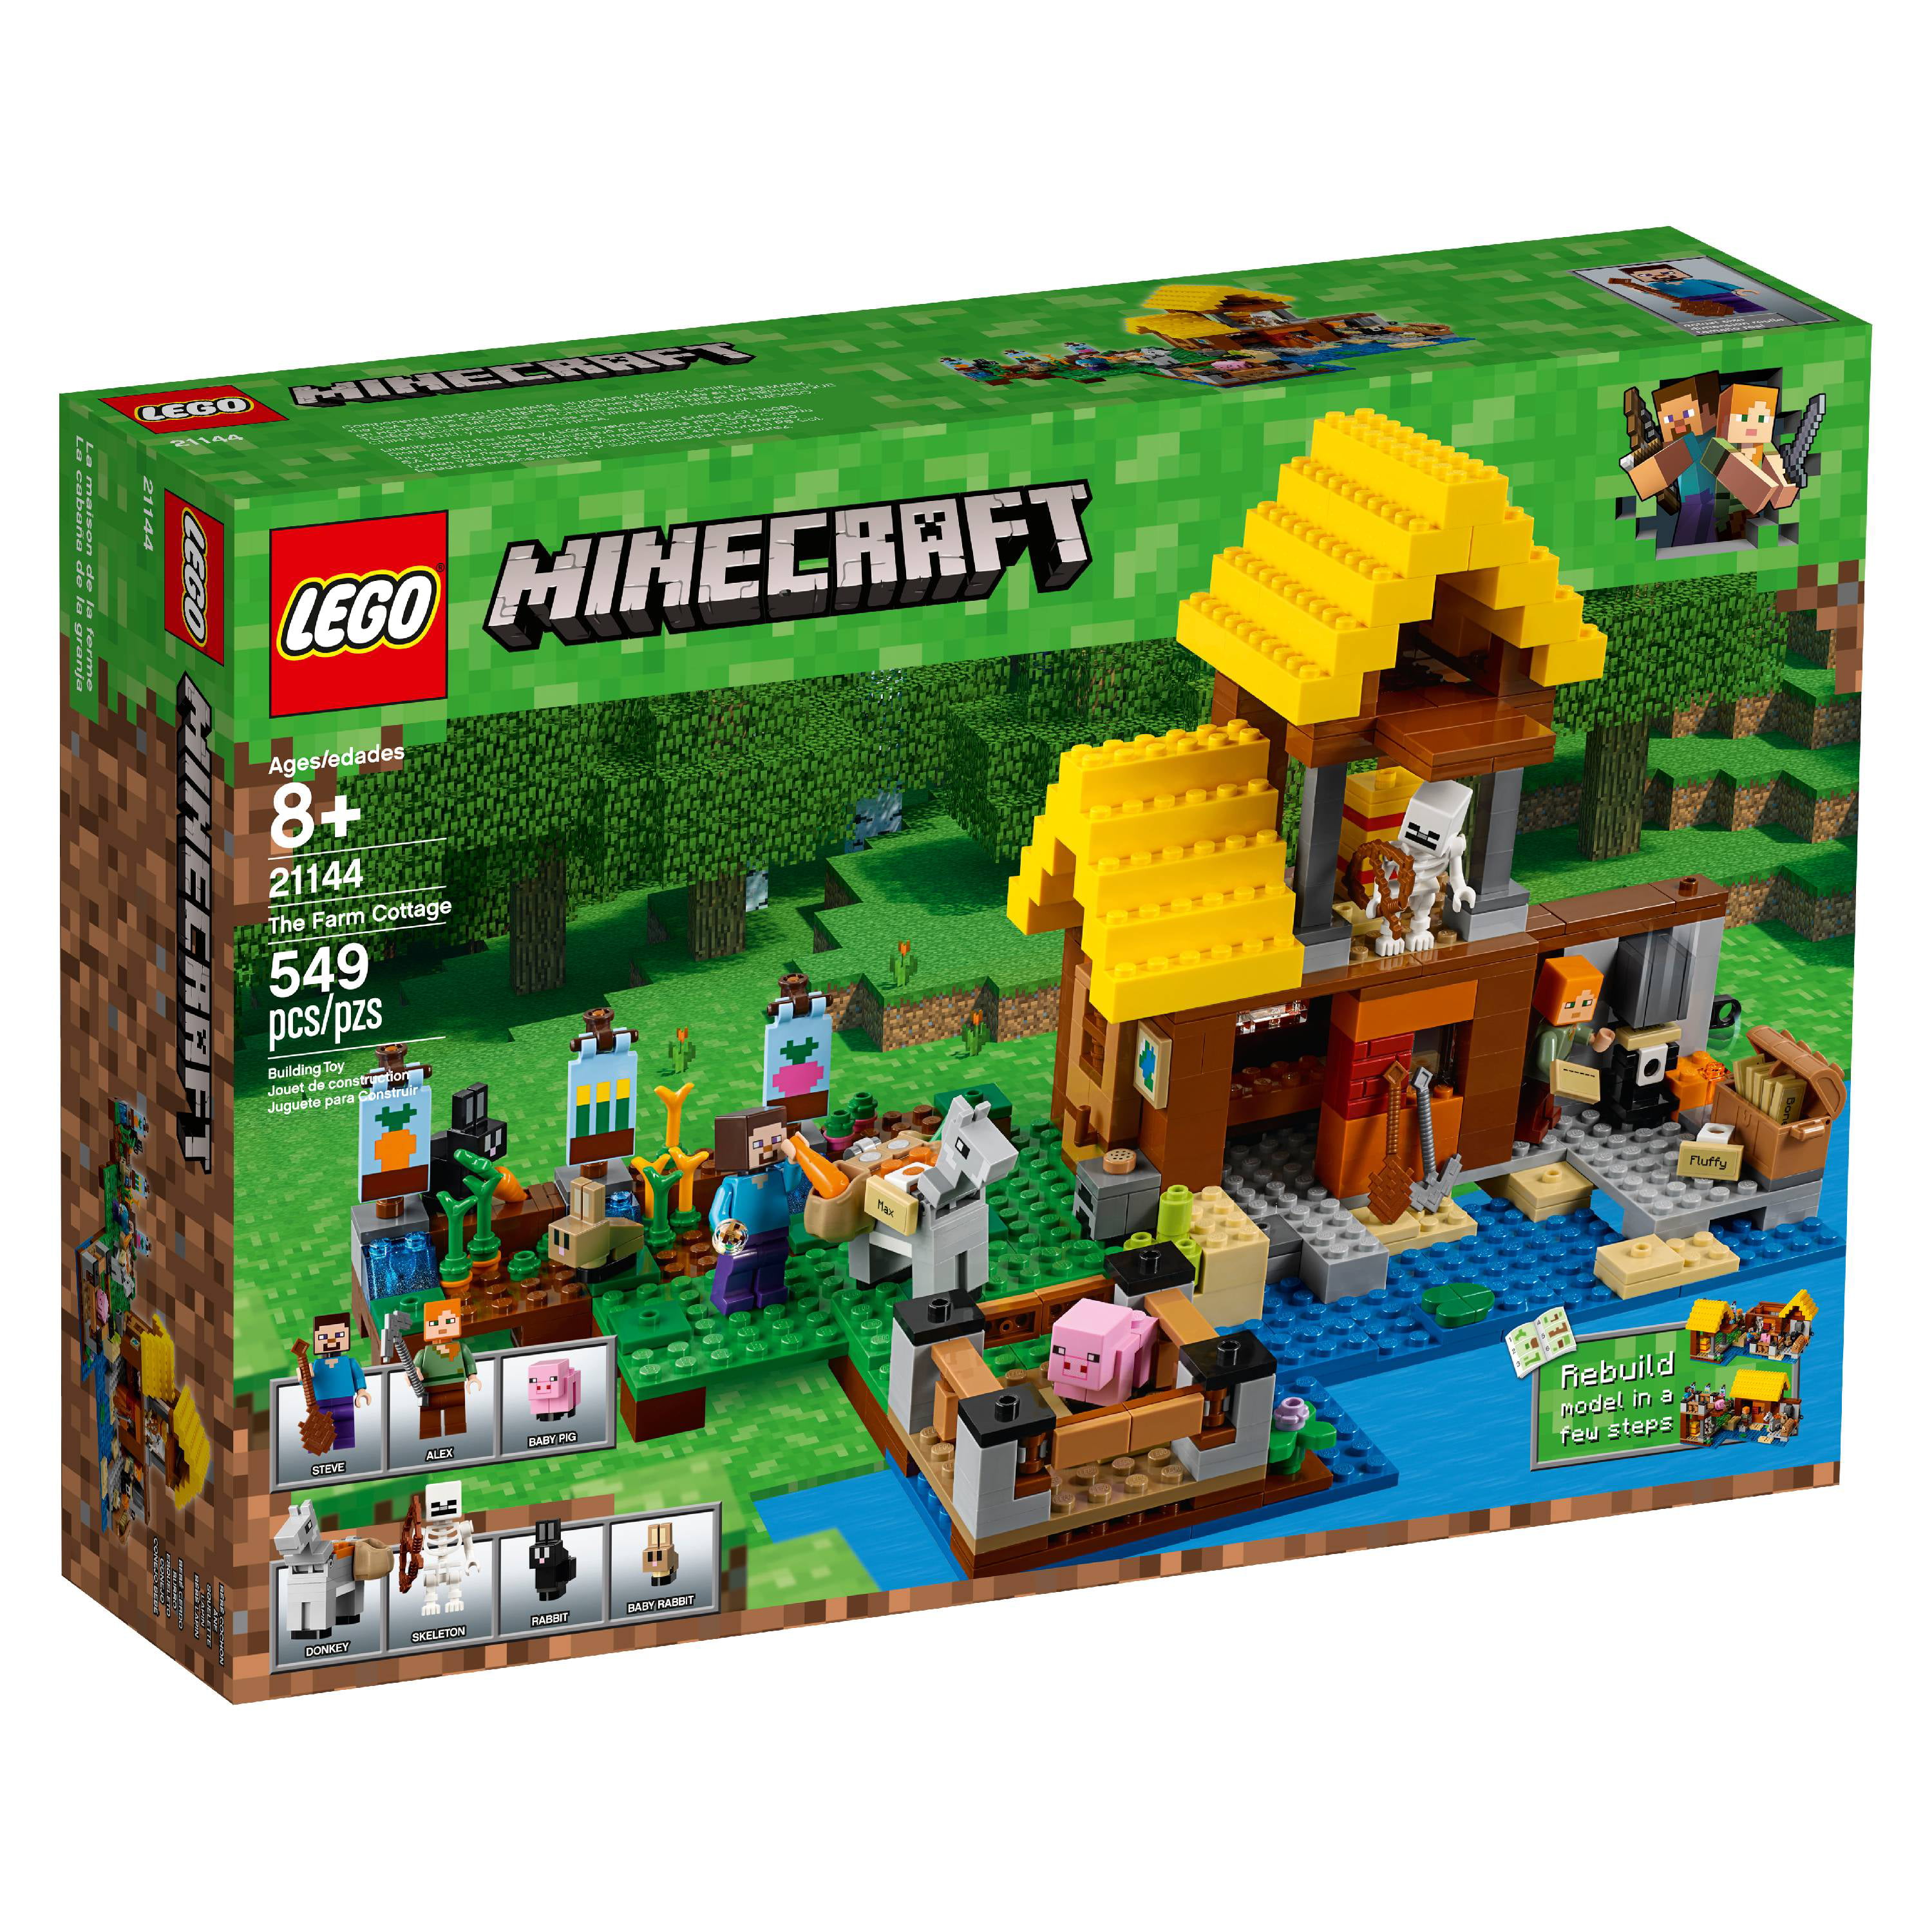 New Lego Minecraft STICKER SHEET ONLY for Lego set 21144 The Farm Cottage